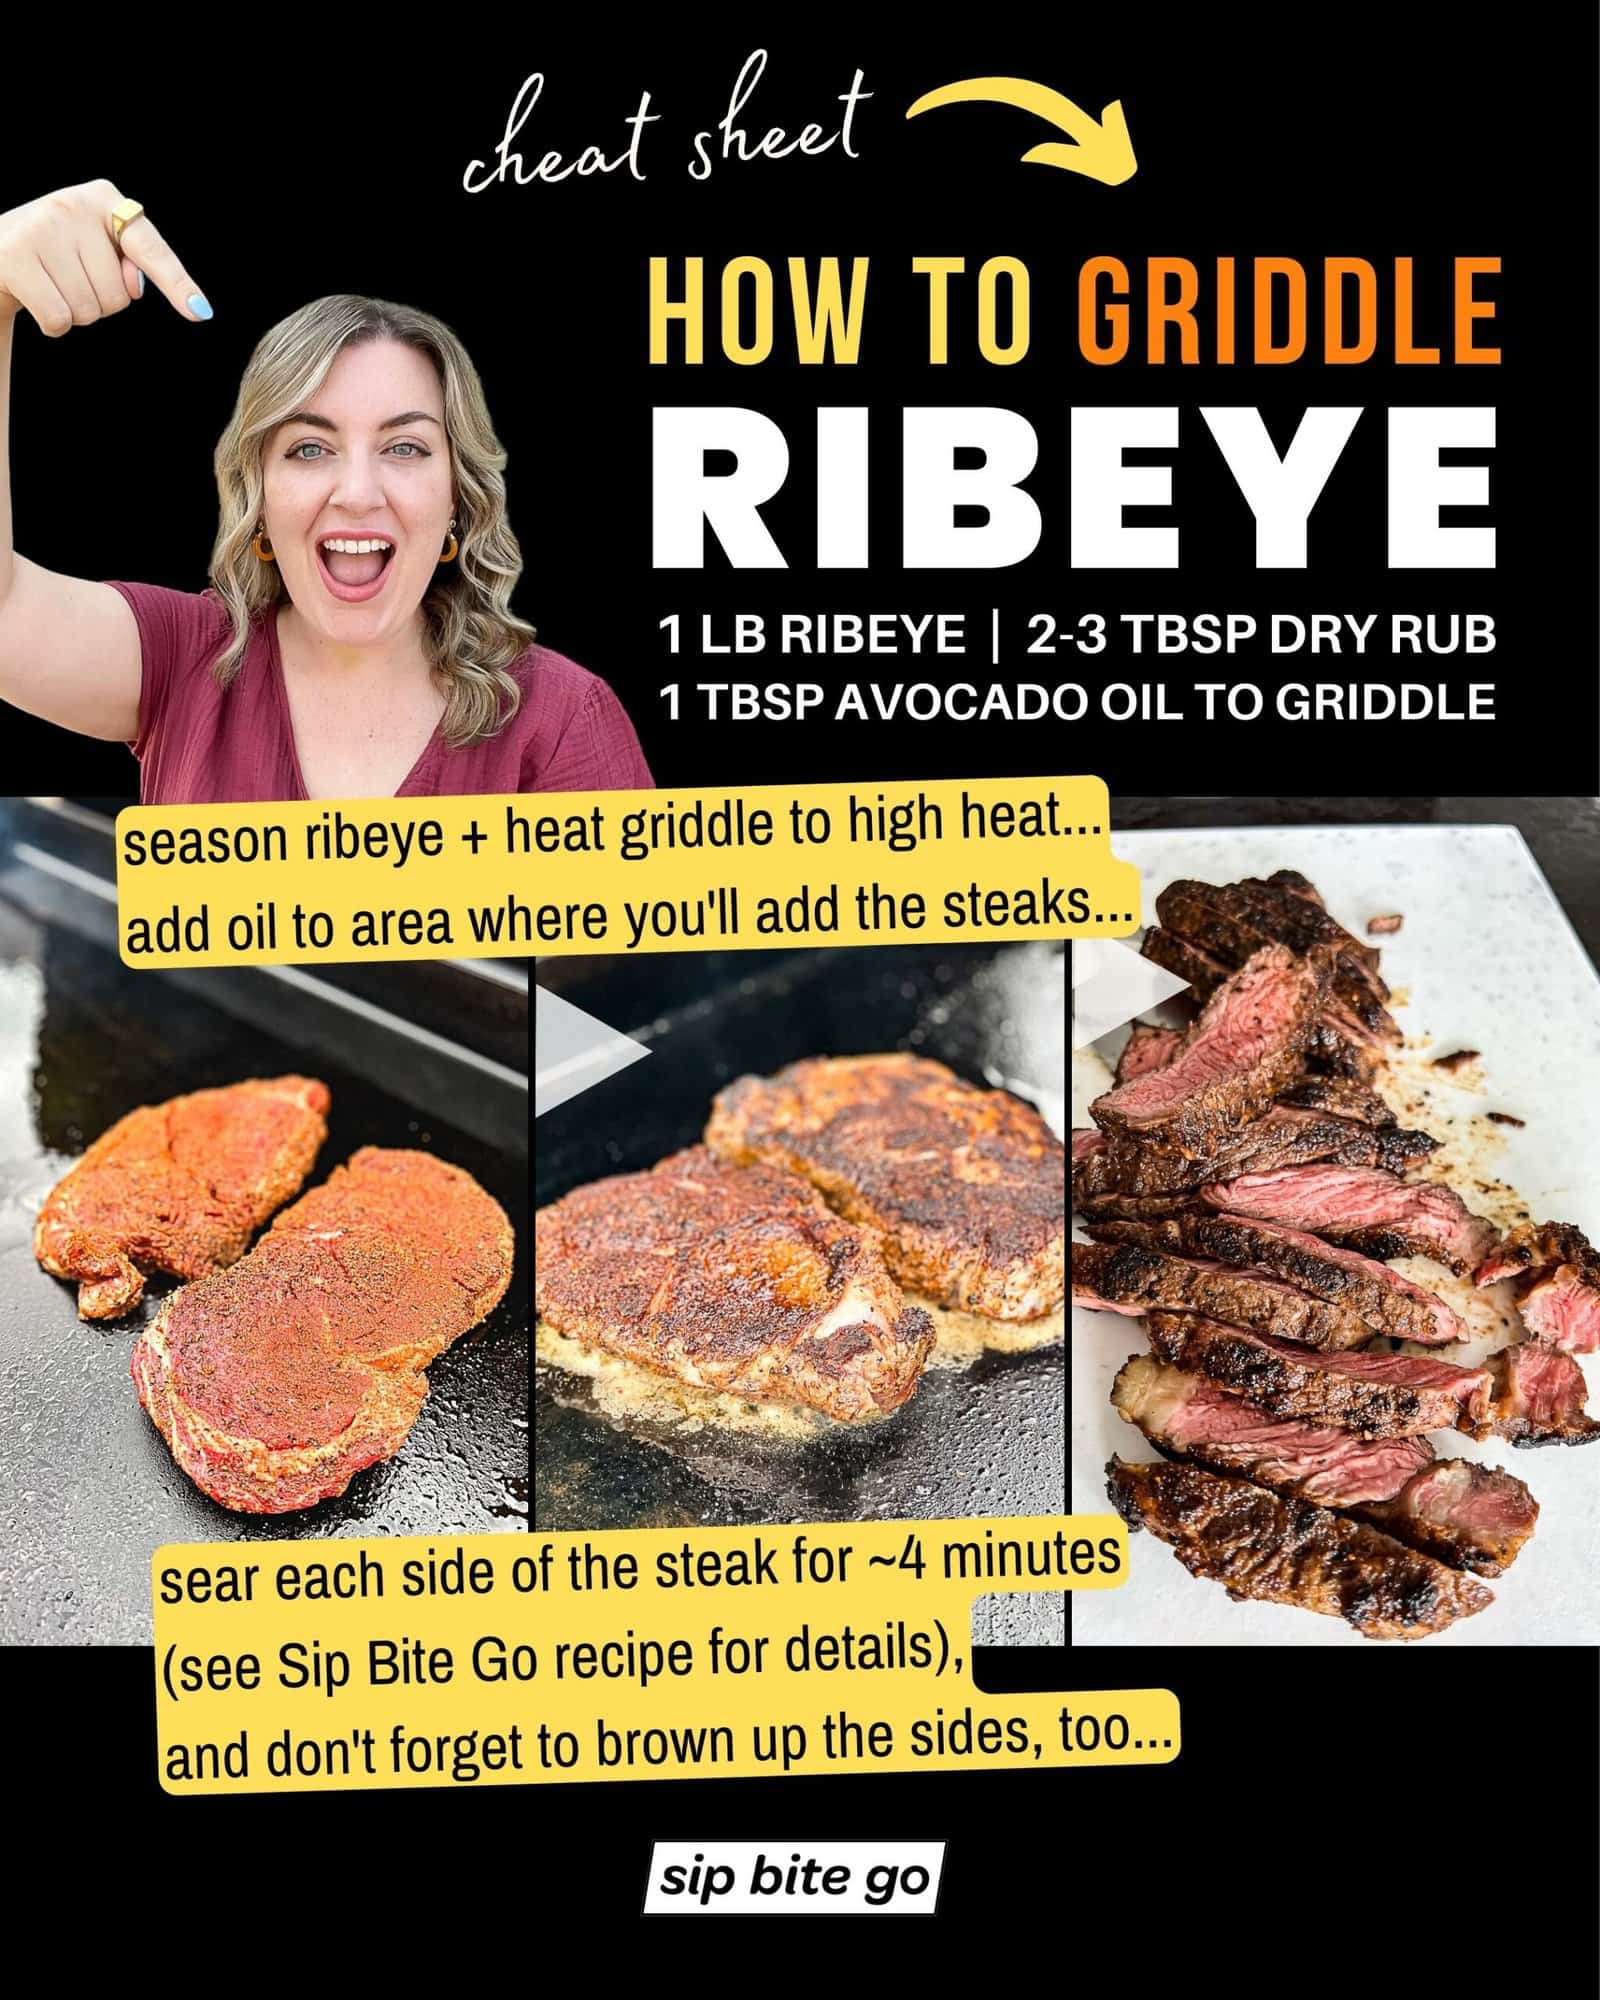 Infographic demonstrating how to griddle ribeye steaks with ingredients list and directions with Sip Bite Go logo